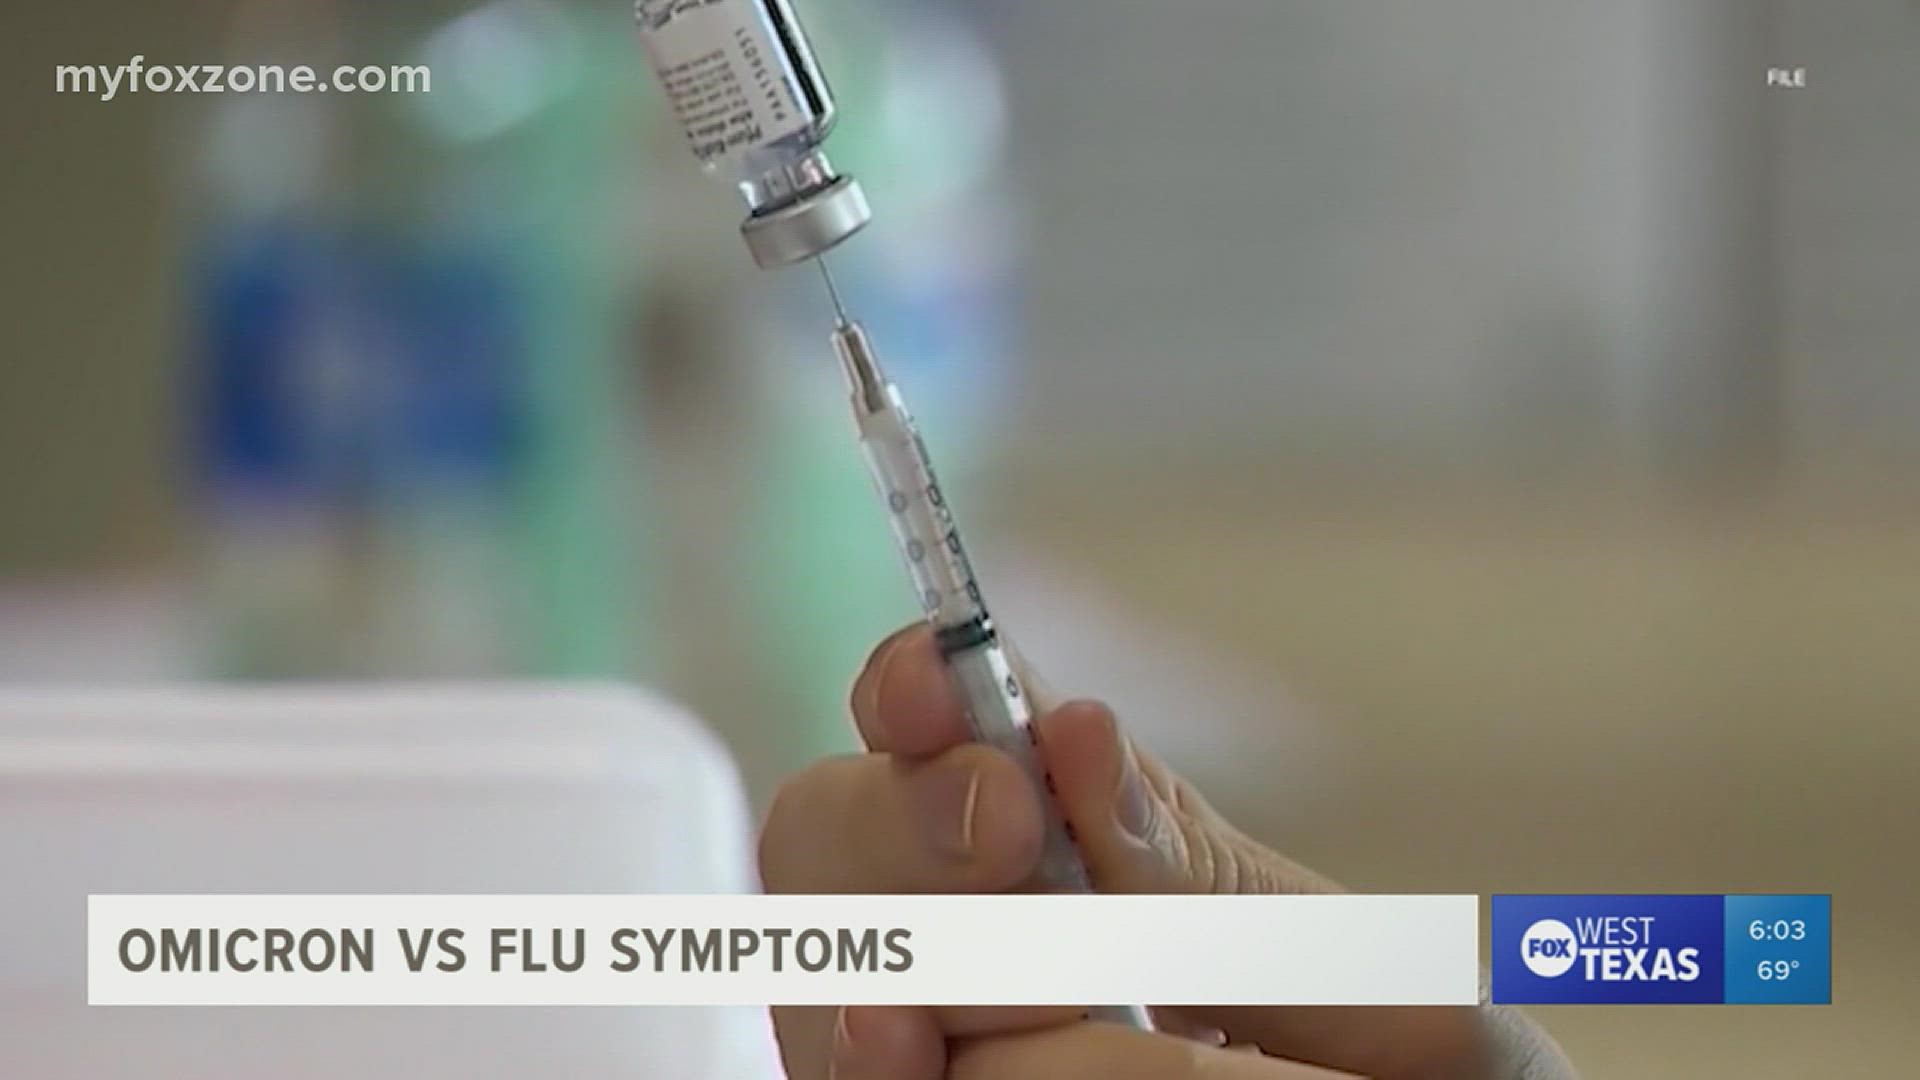 We spoke with a local health authority about how to differentiate between the omicron variant and the flu.